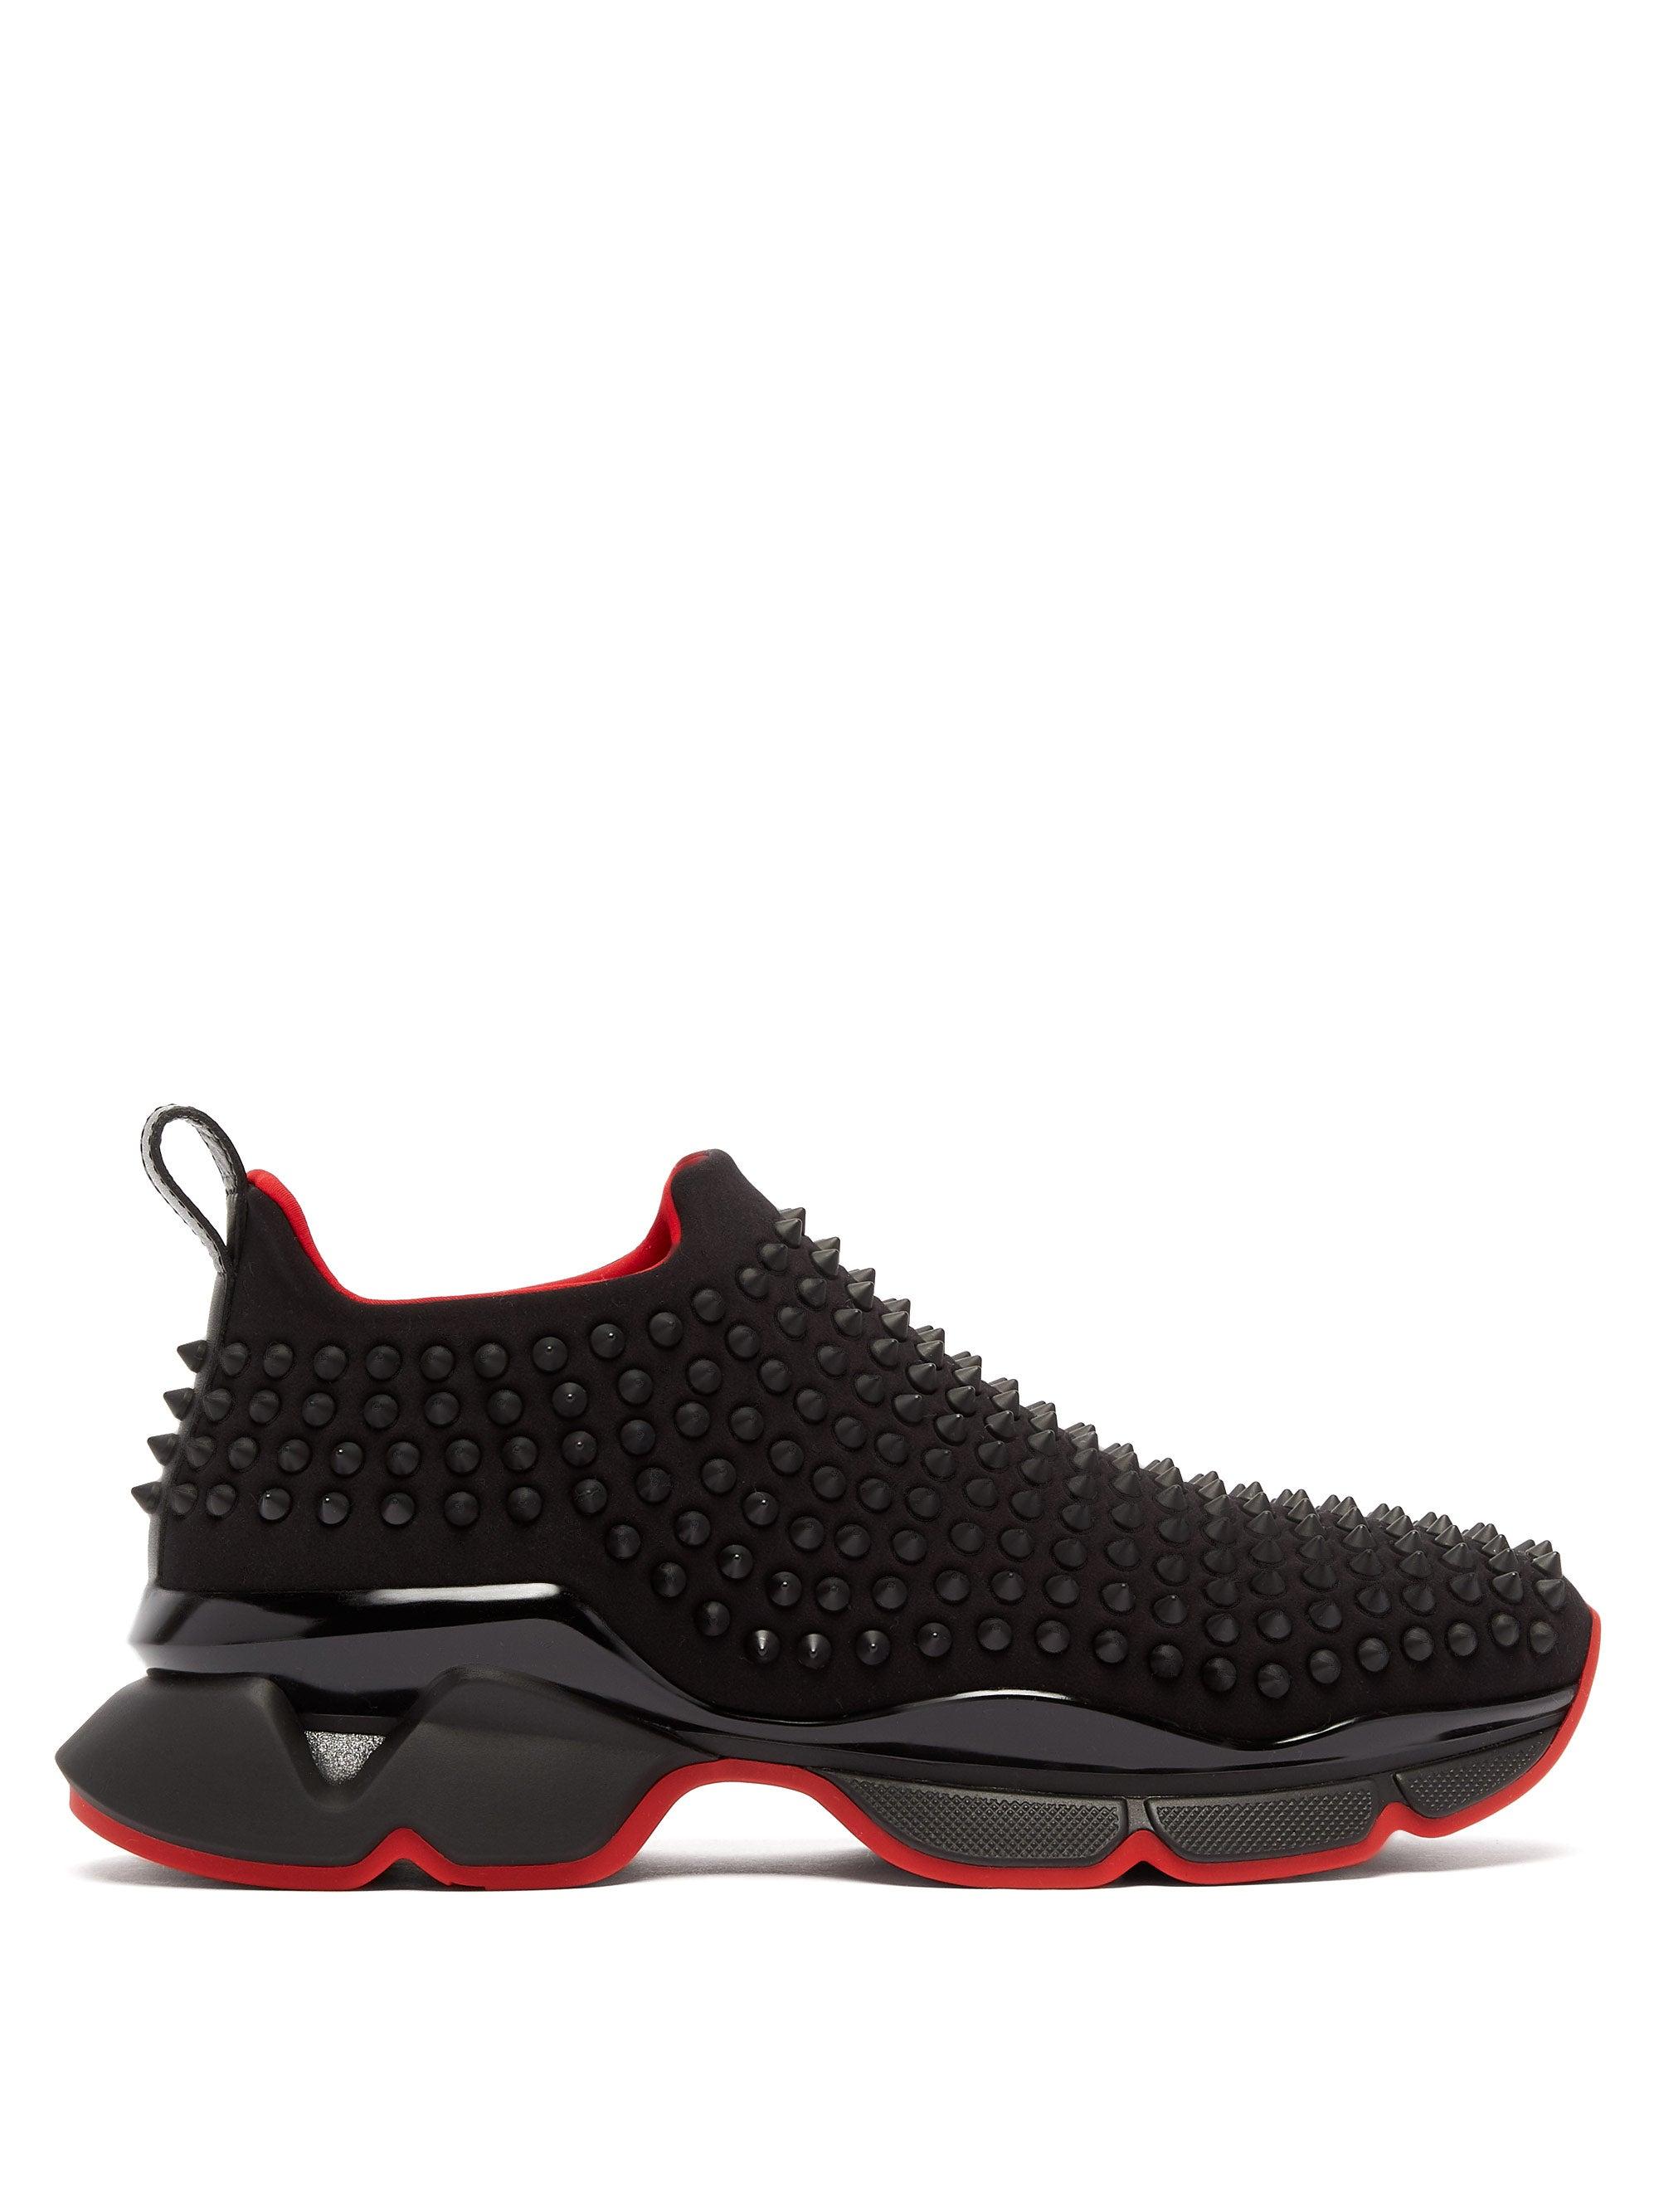 Christian Louboutin Spike Sock Donna Flat Sneakers in Black - Save 